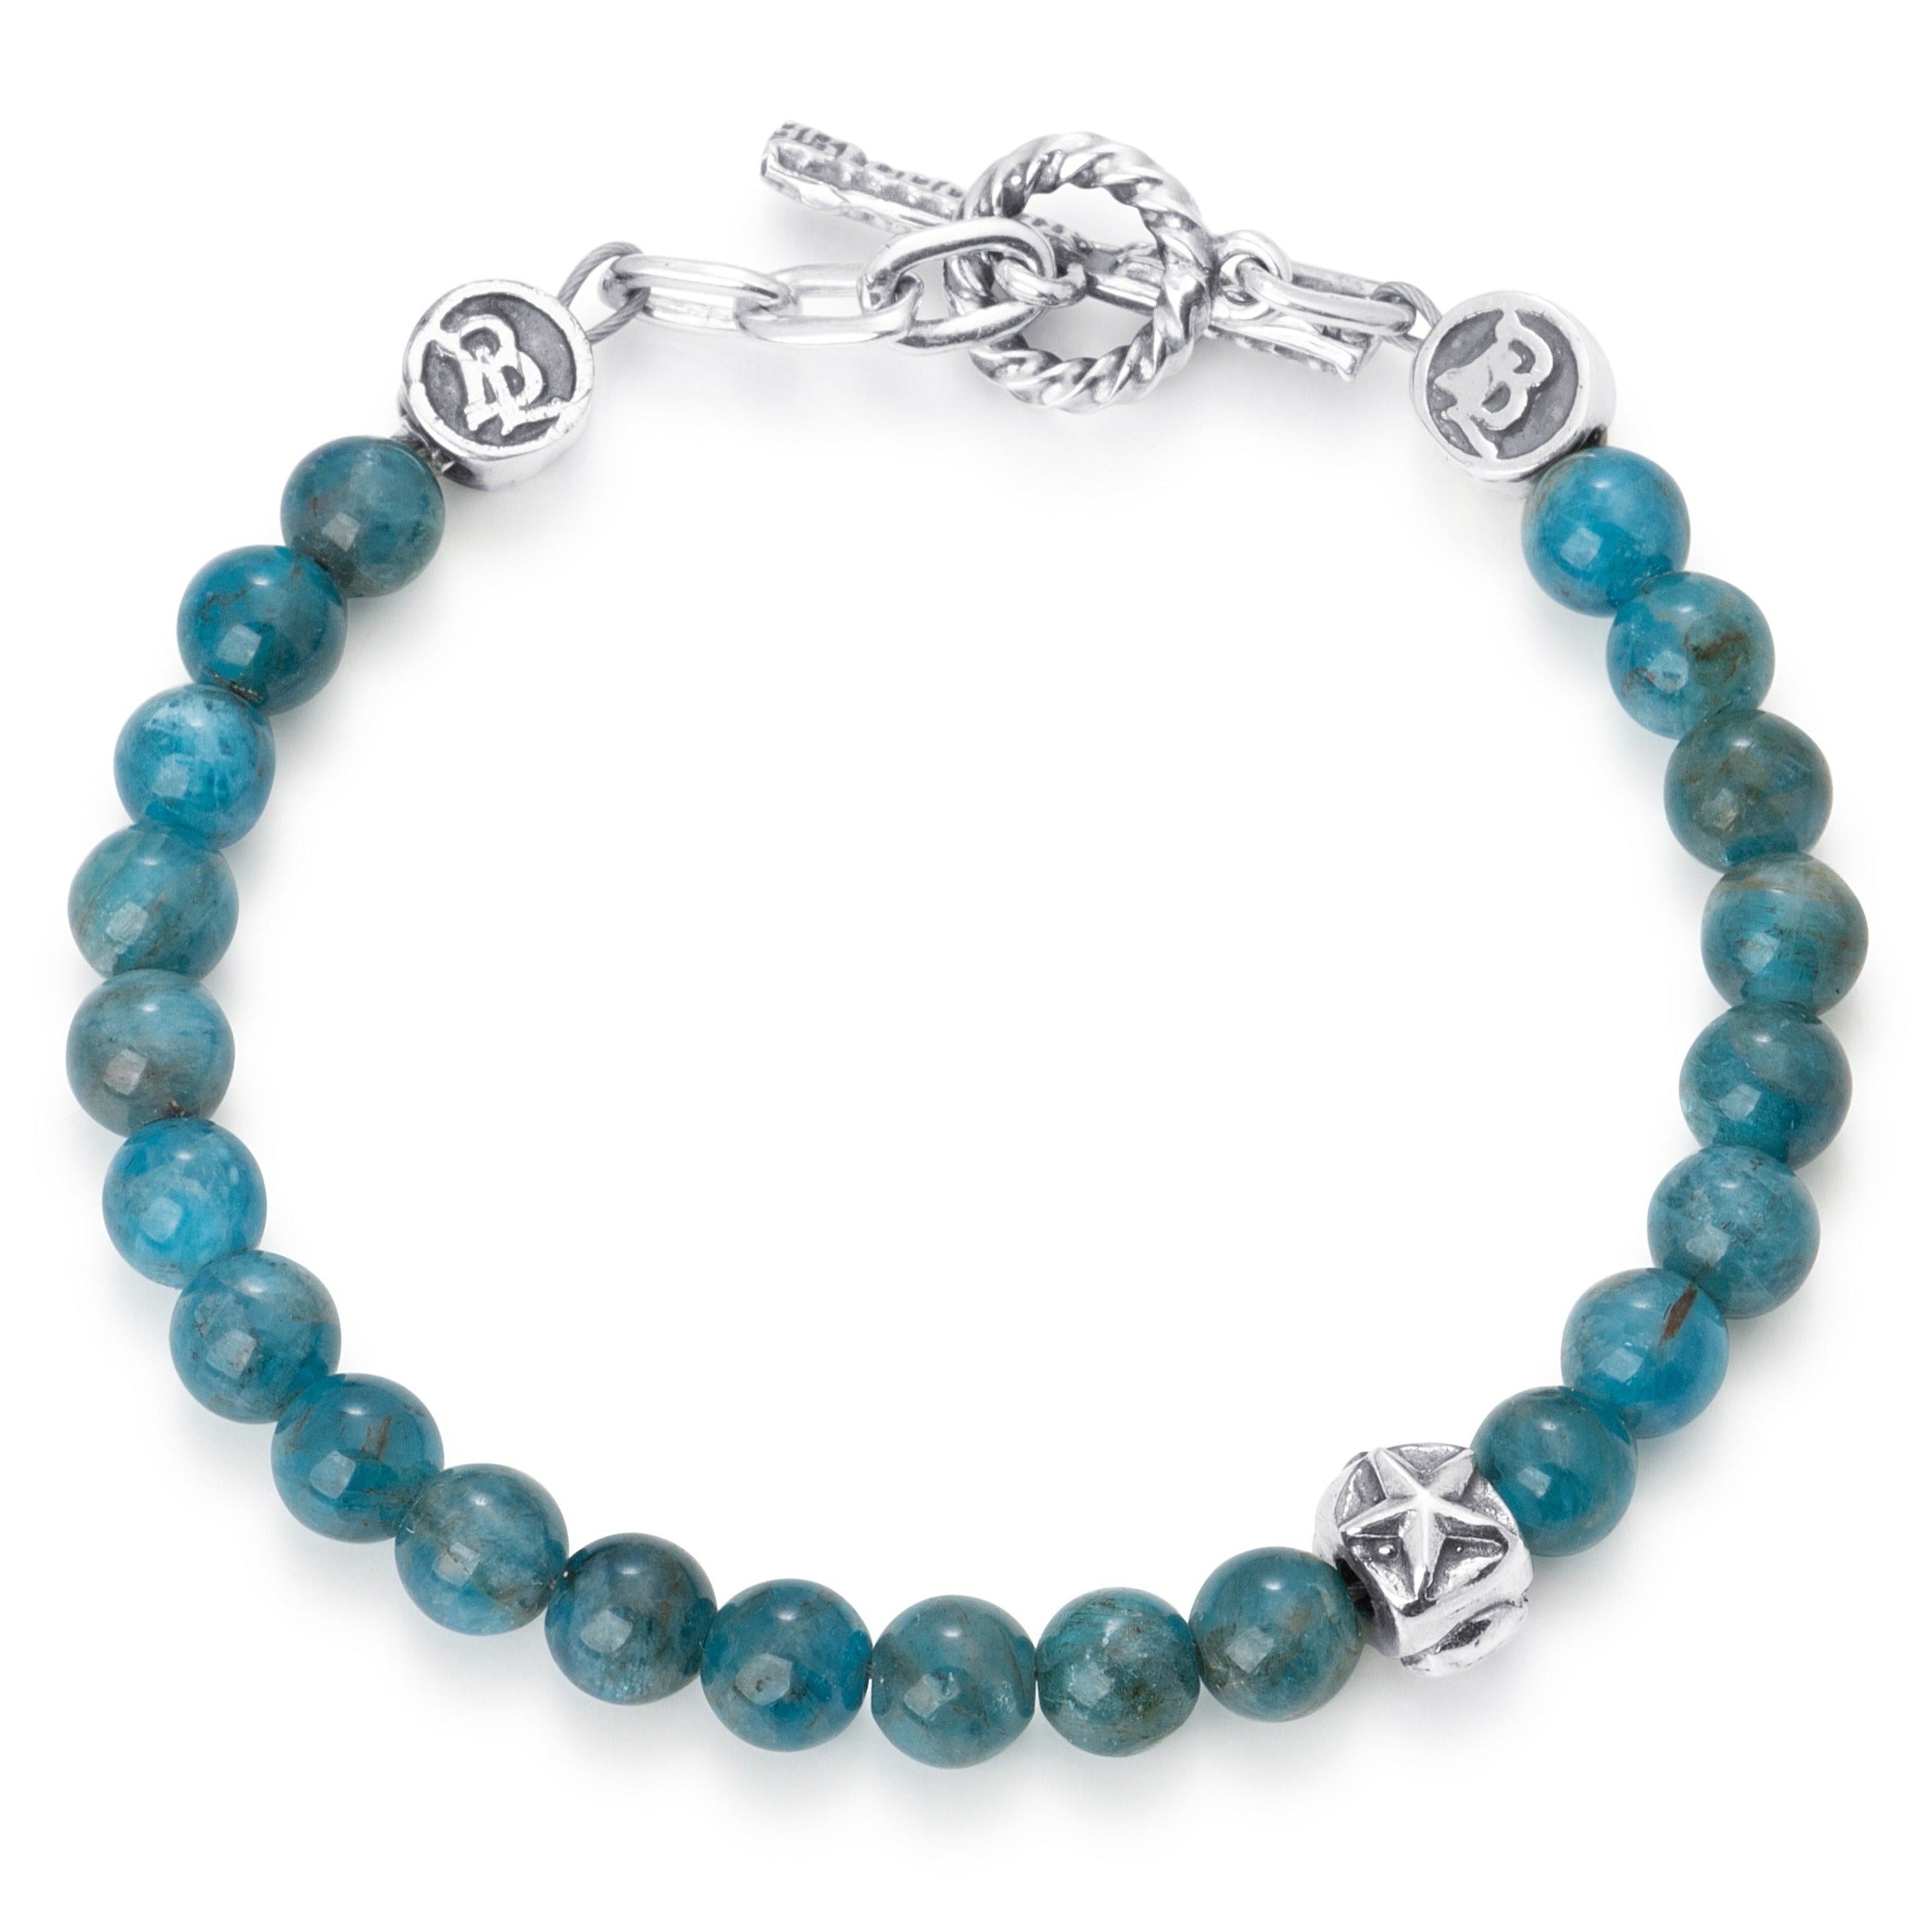 Apatite Beads paired with a single sterling silver bead engraved with a heart star and skull on a stainless steel cable with Sterling silver T clasp.